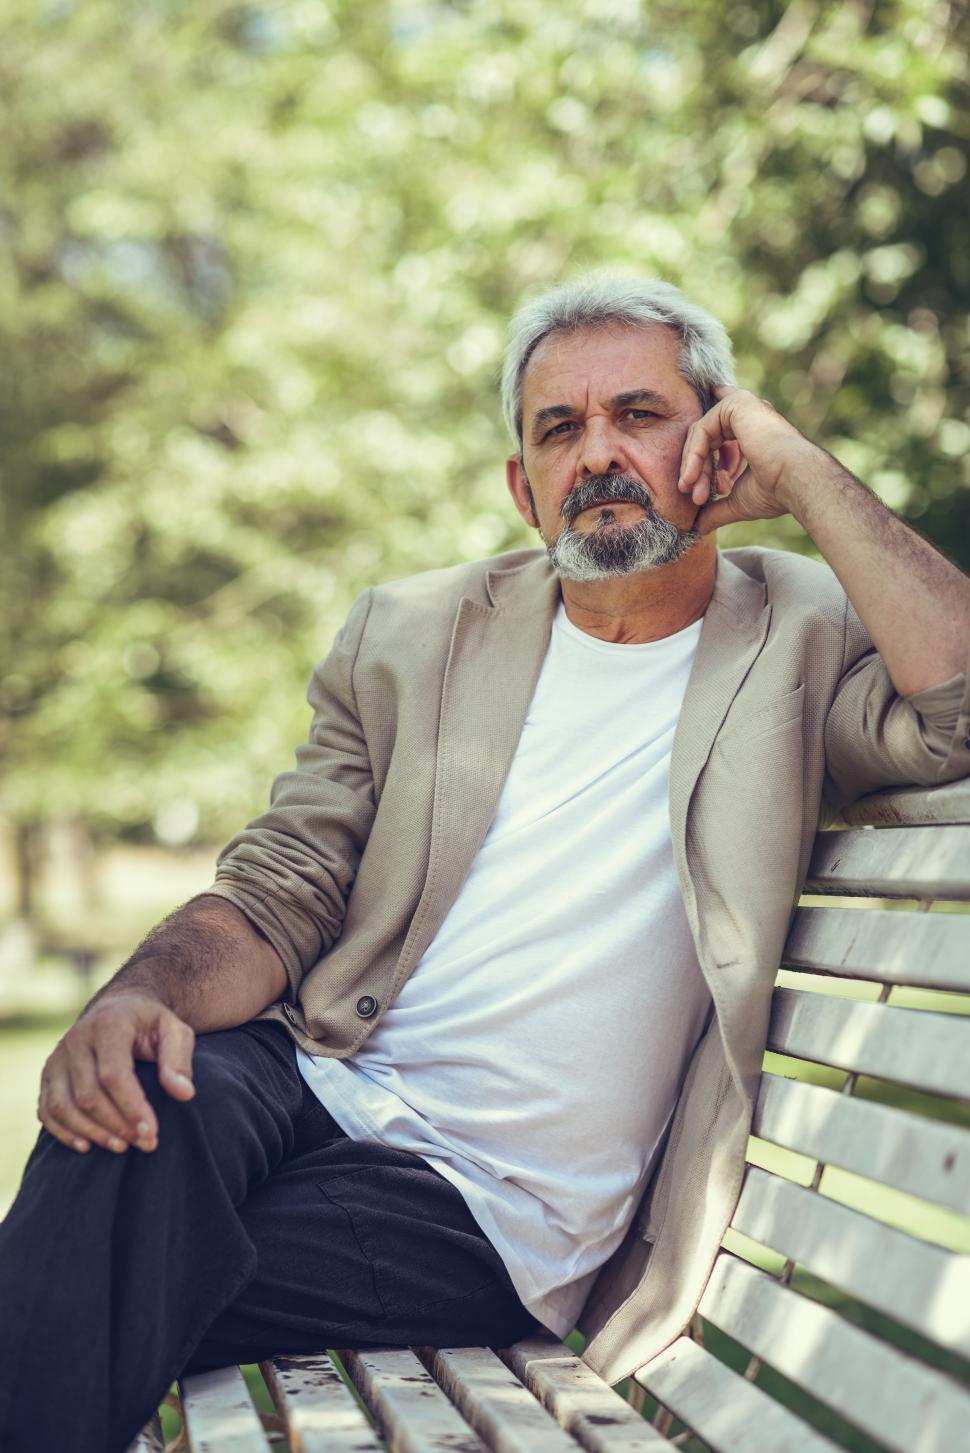 Free Stock Photo of Pensive mature man sitting on bench in an urban ...